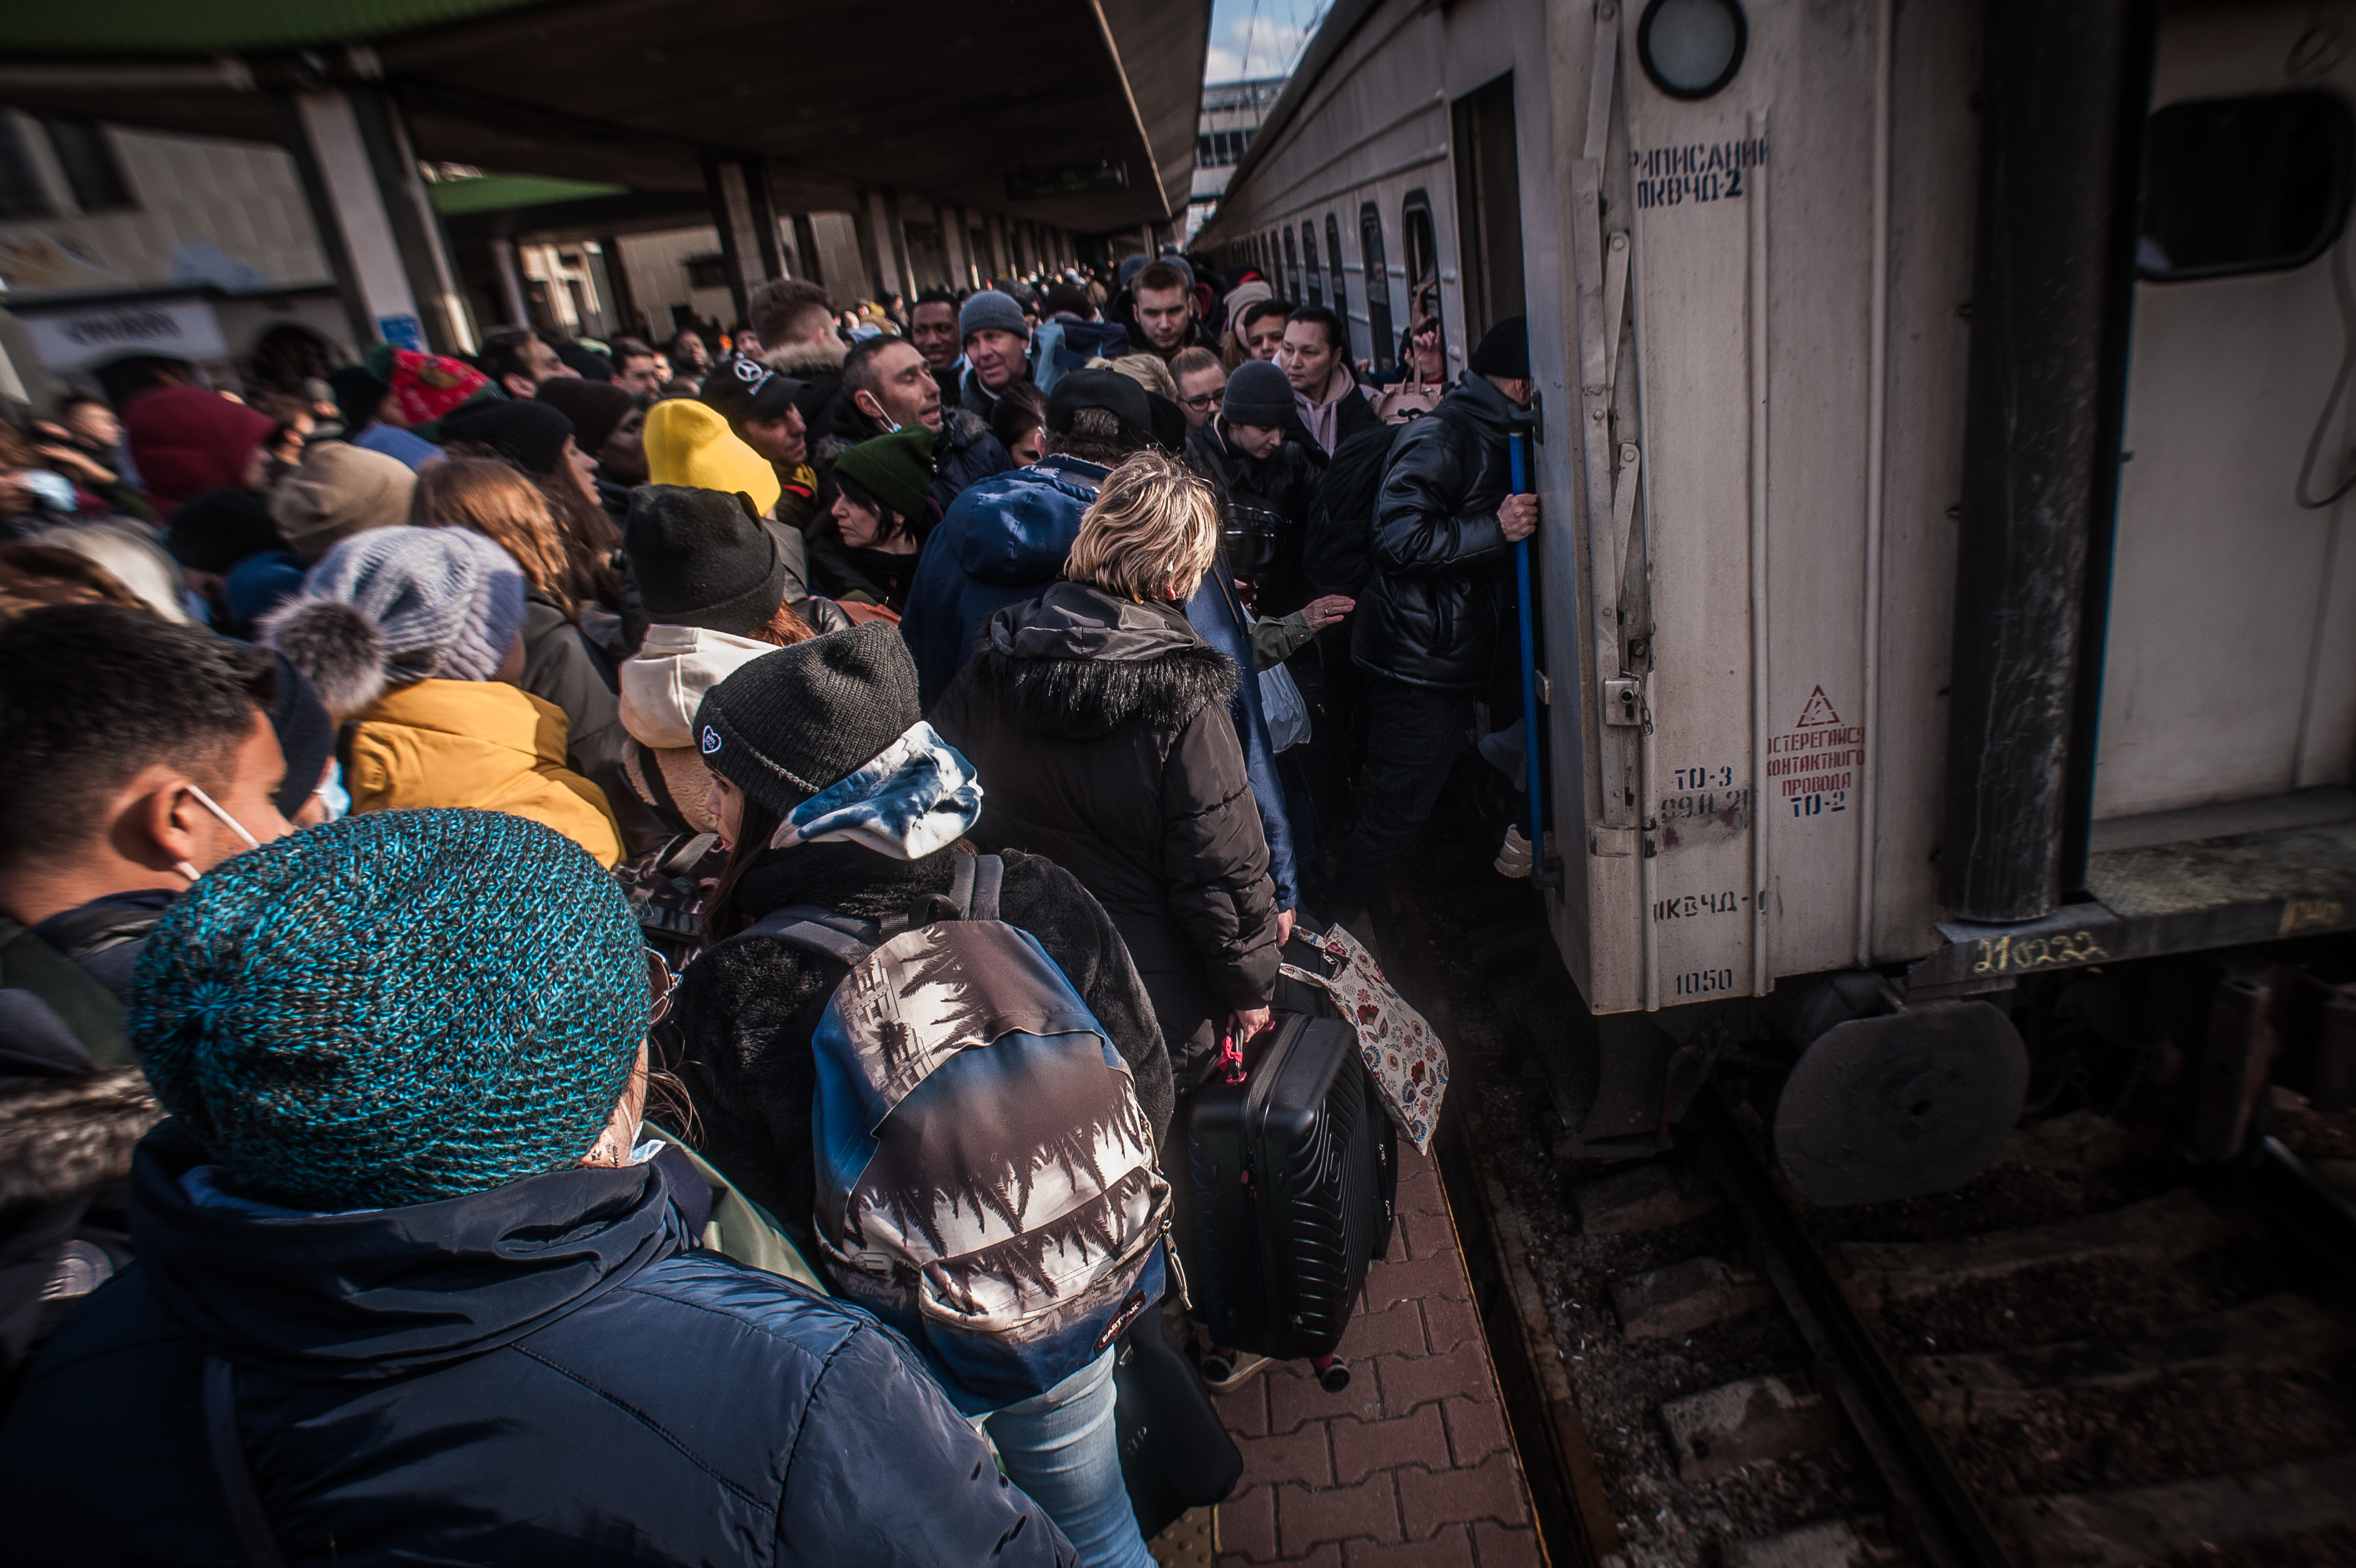 Kyiv citizens try to evacuate by a train to western Ukraine on a platform at Kyiv Central Railway Station, on February 26. Credit: Alina Smutko